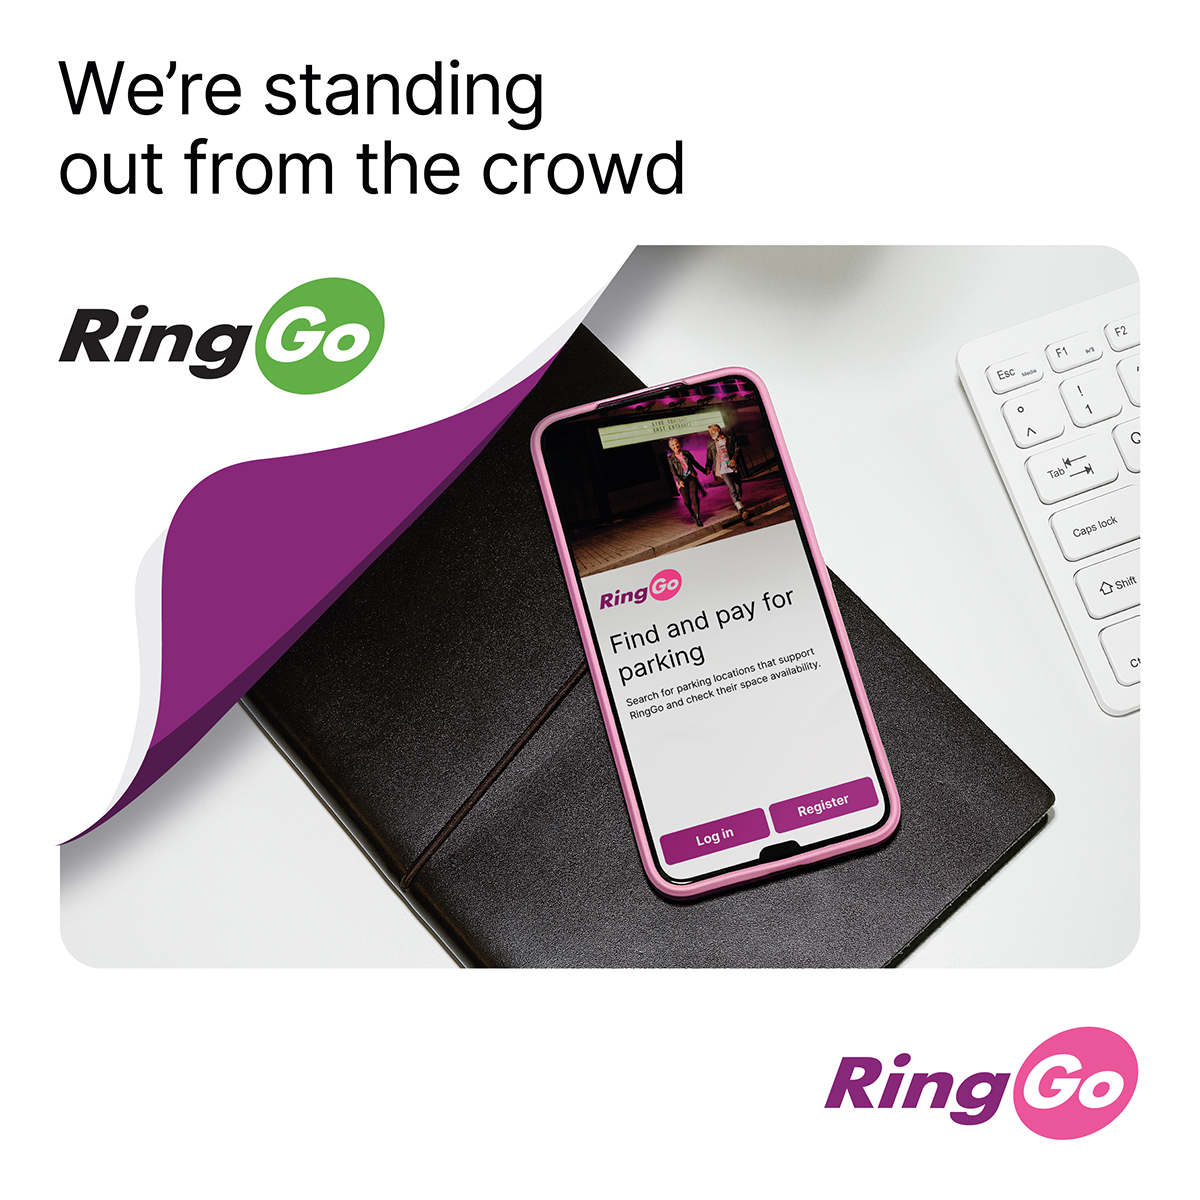 Coming soon! From 2 May 2023 RingGo is getting a whole new look and feel - we’re standing out from the crowd! Want to know why we’re making this change? See RingGo.co.uk/Stand-Out Note: There will be no change to how the app operates So you can still pay to park in seconds!